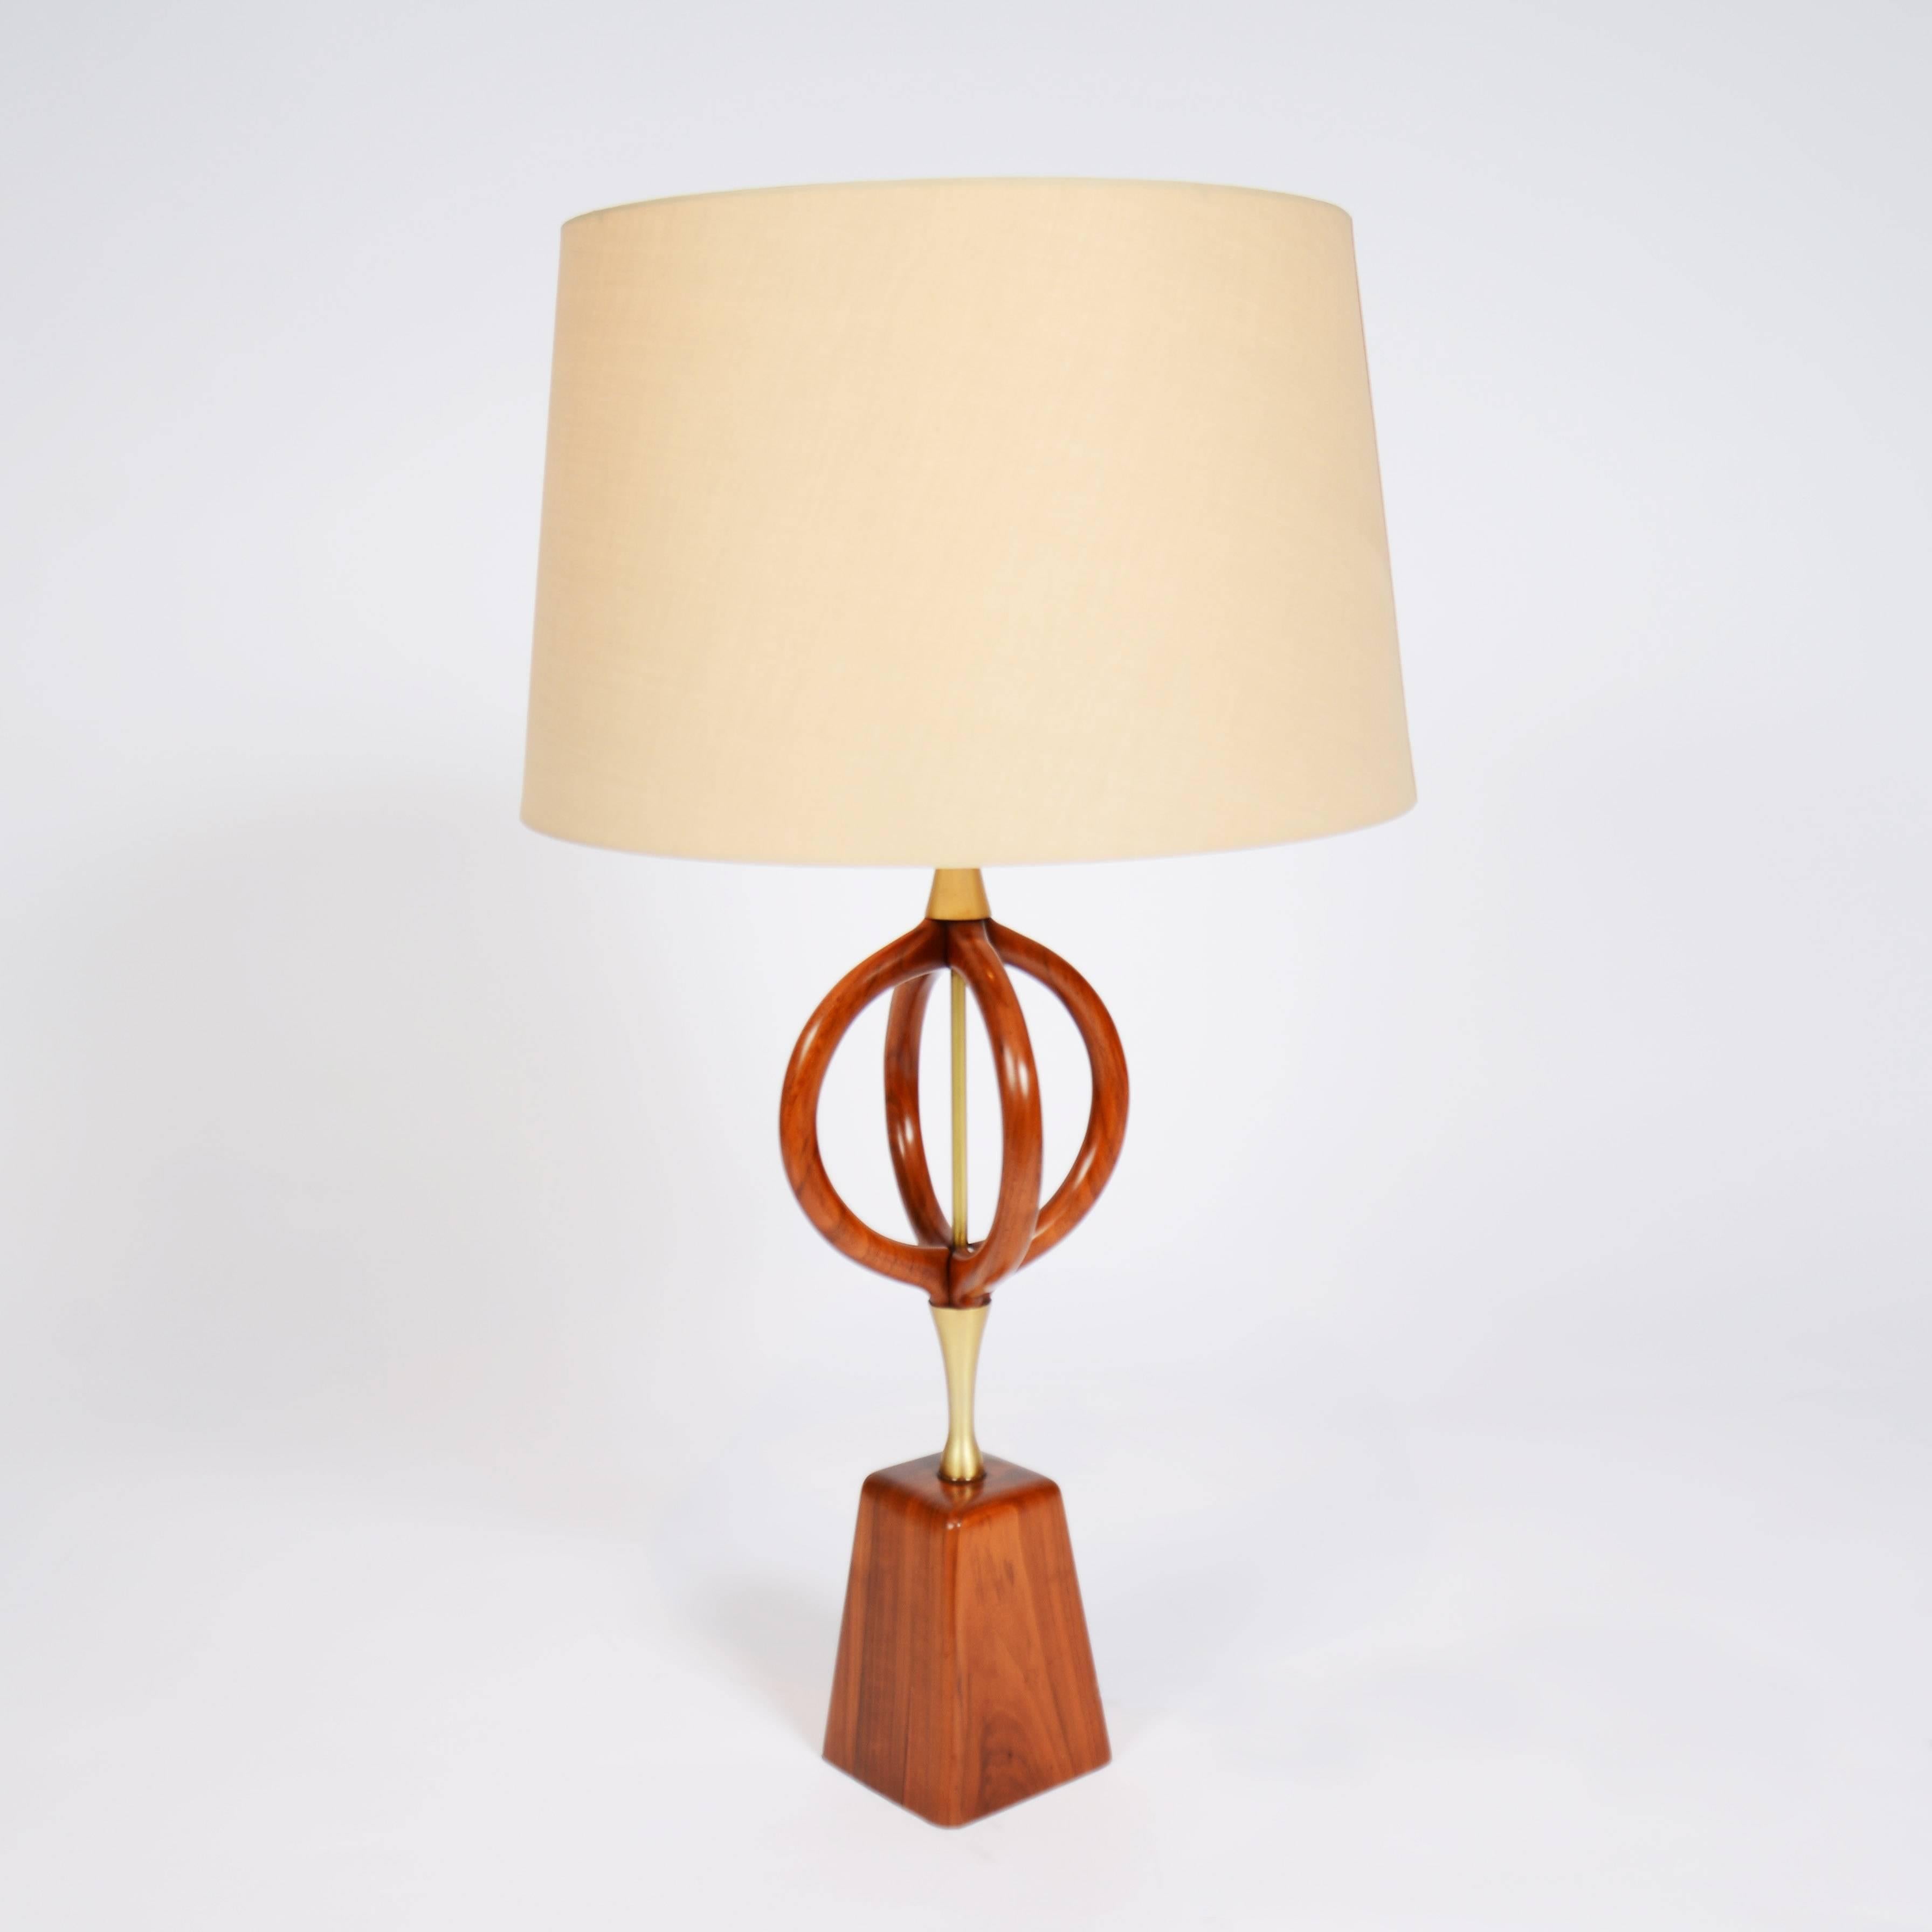 Pair of orb table lamps,
Denmark,
circa 1960.

Walnut with brass detail.